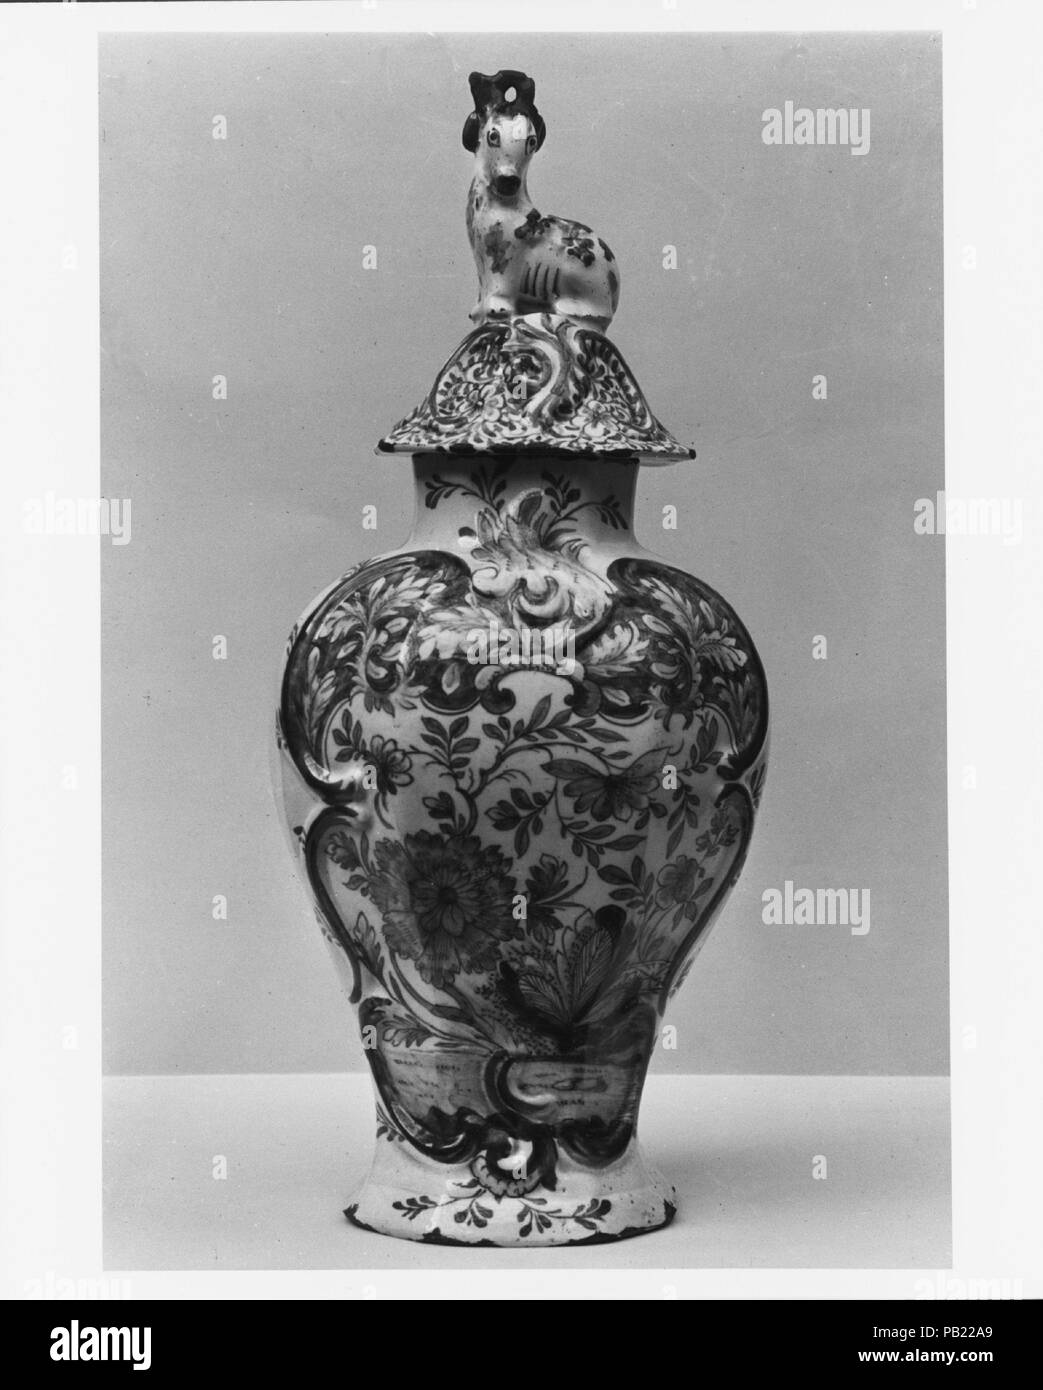 Covered Jar. Culture: Dutch. Designer: Designed by Justus Brouwer (Dutch, active 1739-1775). Dimensions: H. 15 in. (38.1 cm). Manufacturer: Manufactured by The Porcelain Axe. Date: 1739-75. Museum: Metropolitan Museum of Art, New York, USA. Stock Photo